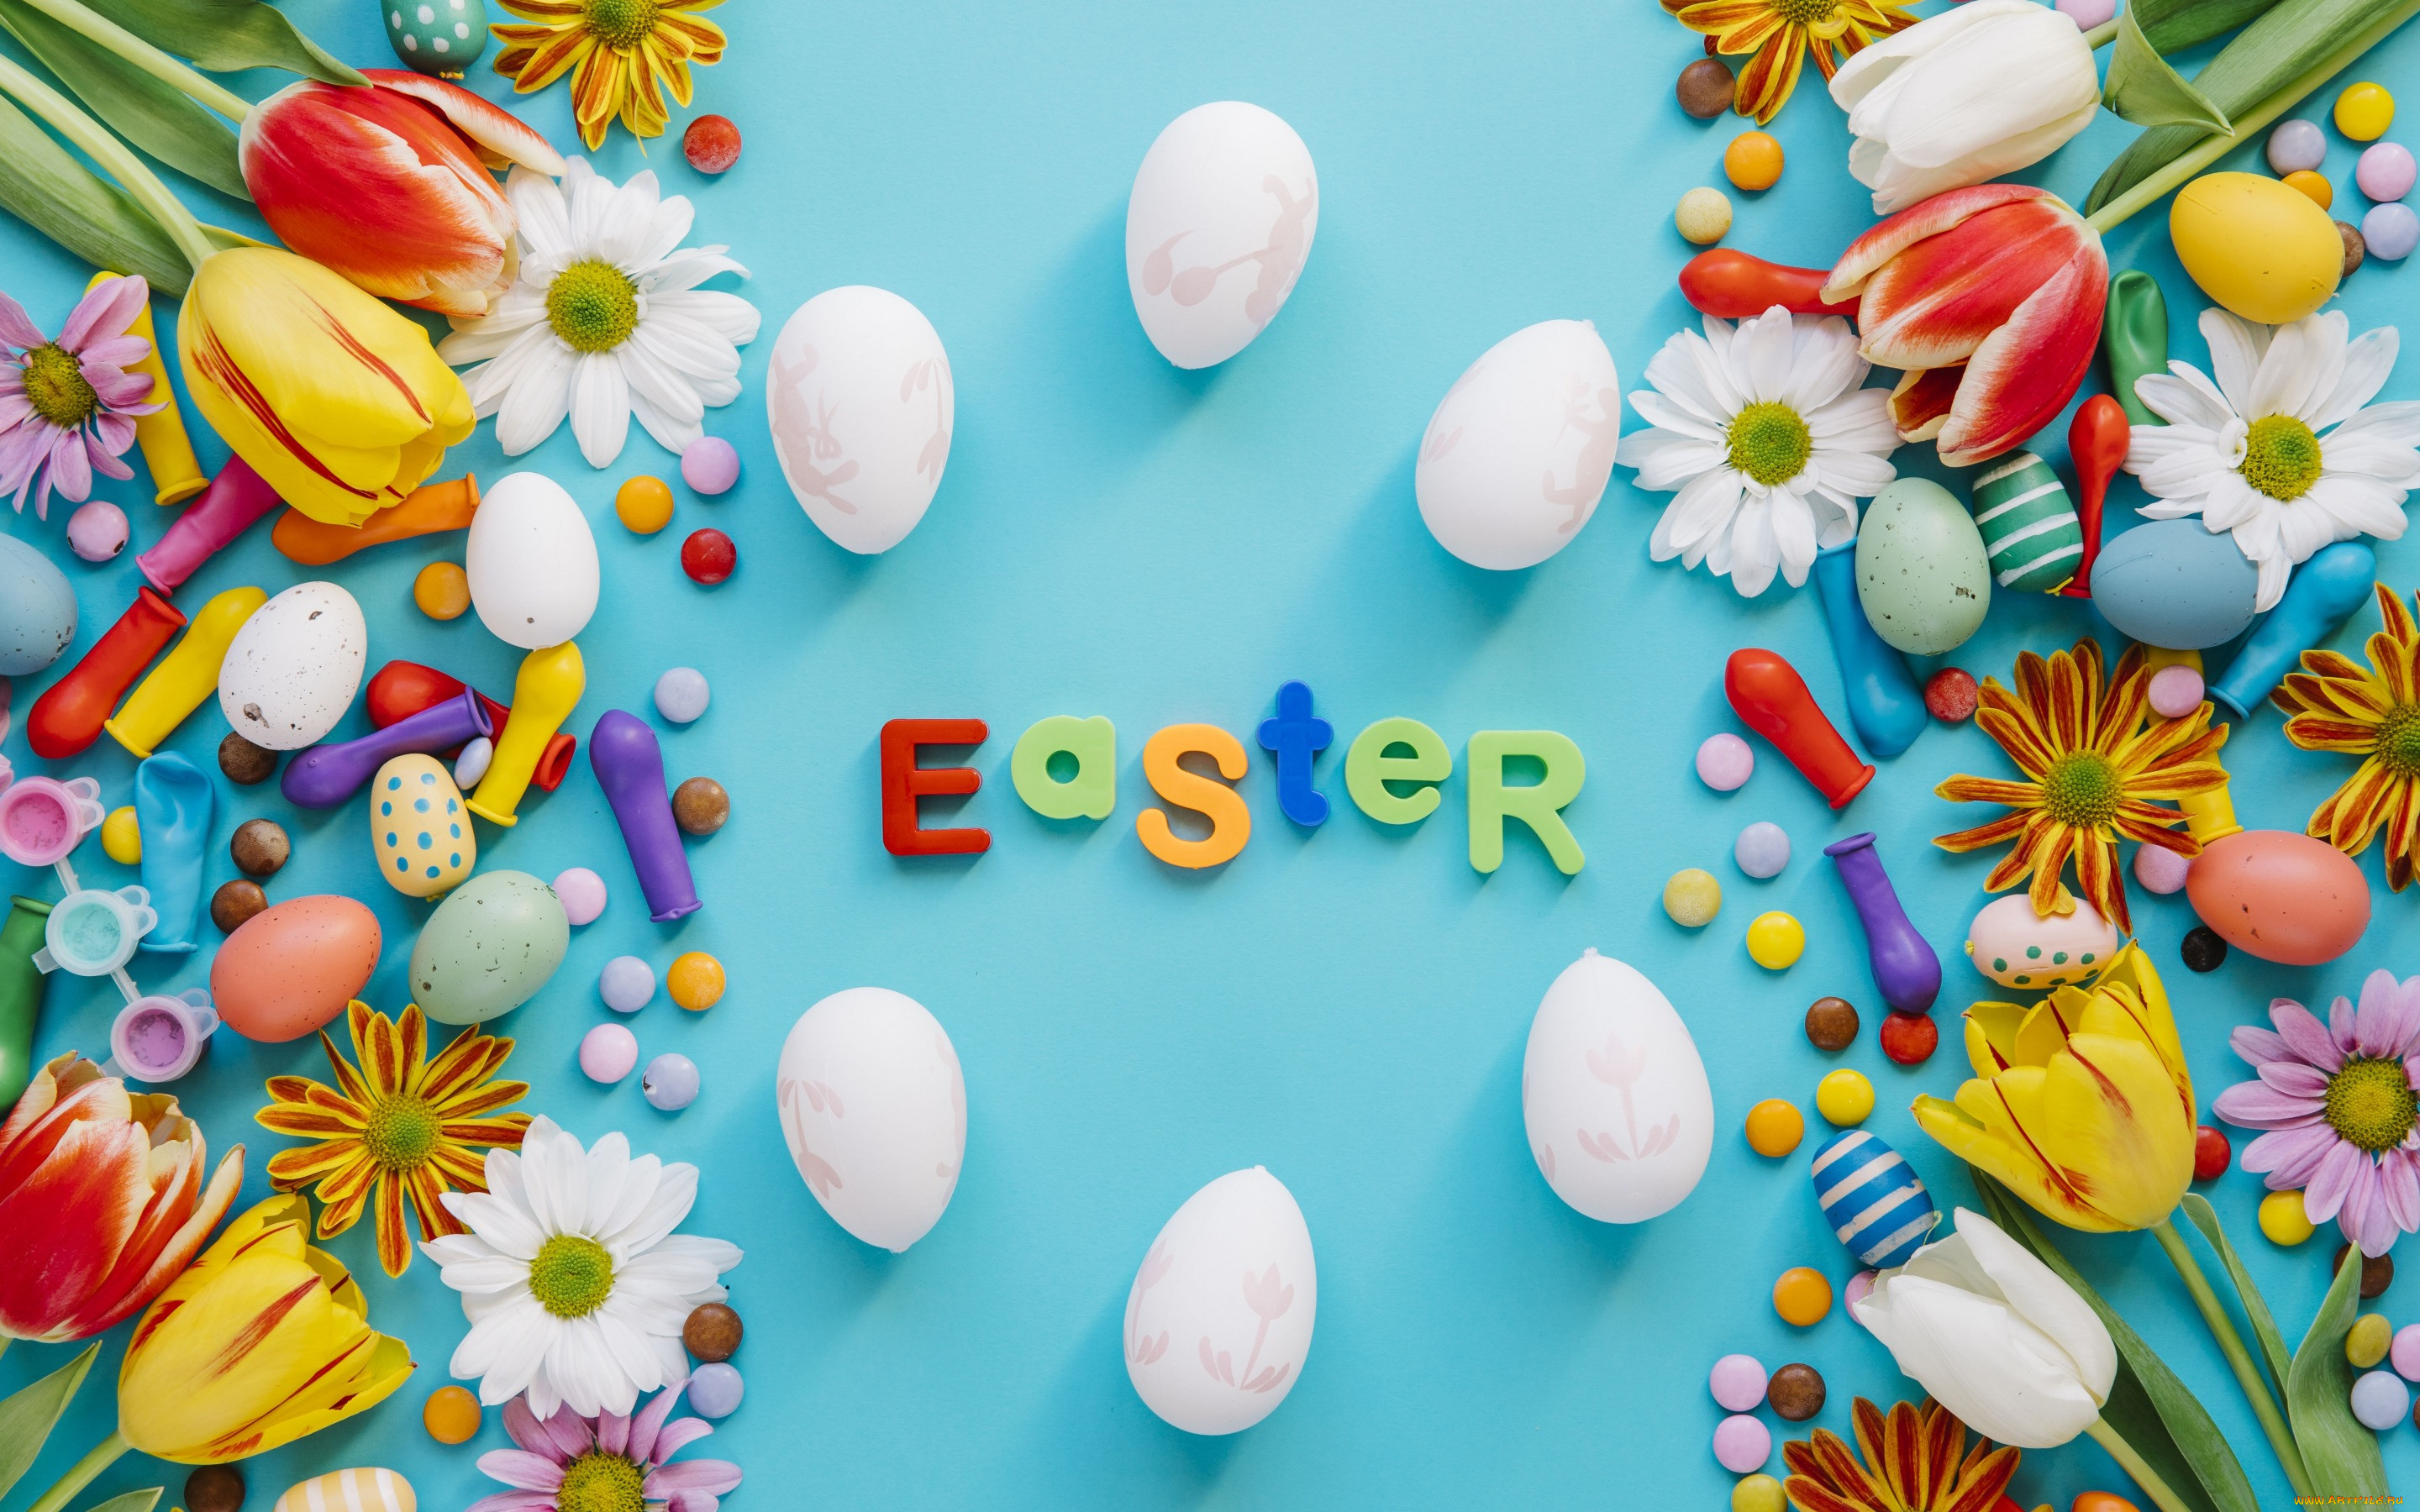 , , , eggs, , flowers, , tulips, , , , easter, , colorful, , decoration, candy, happy, spring